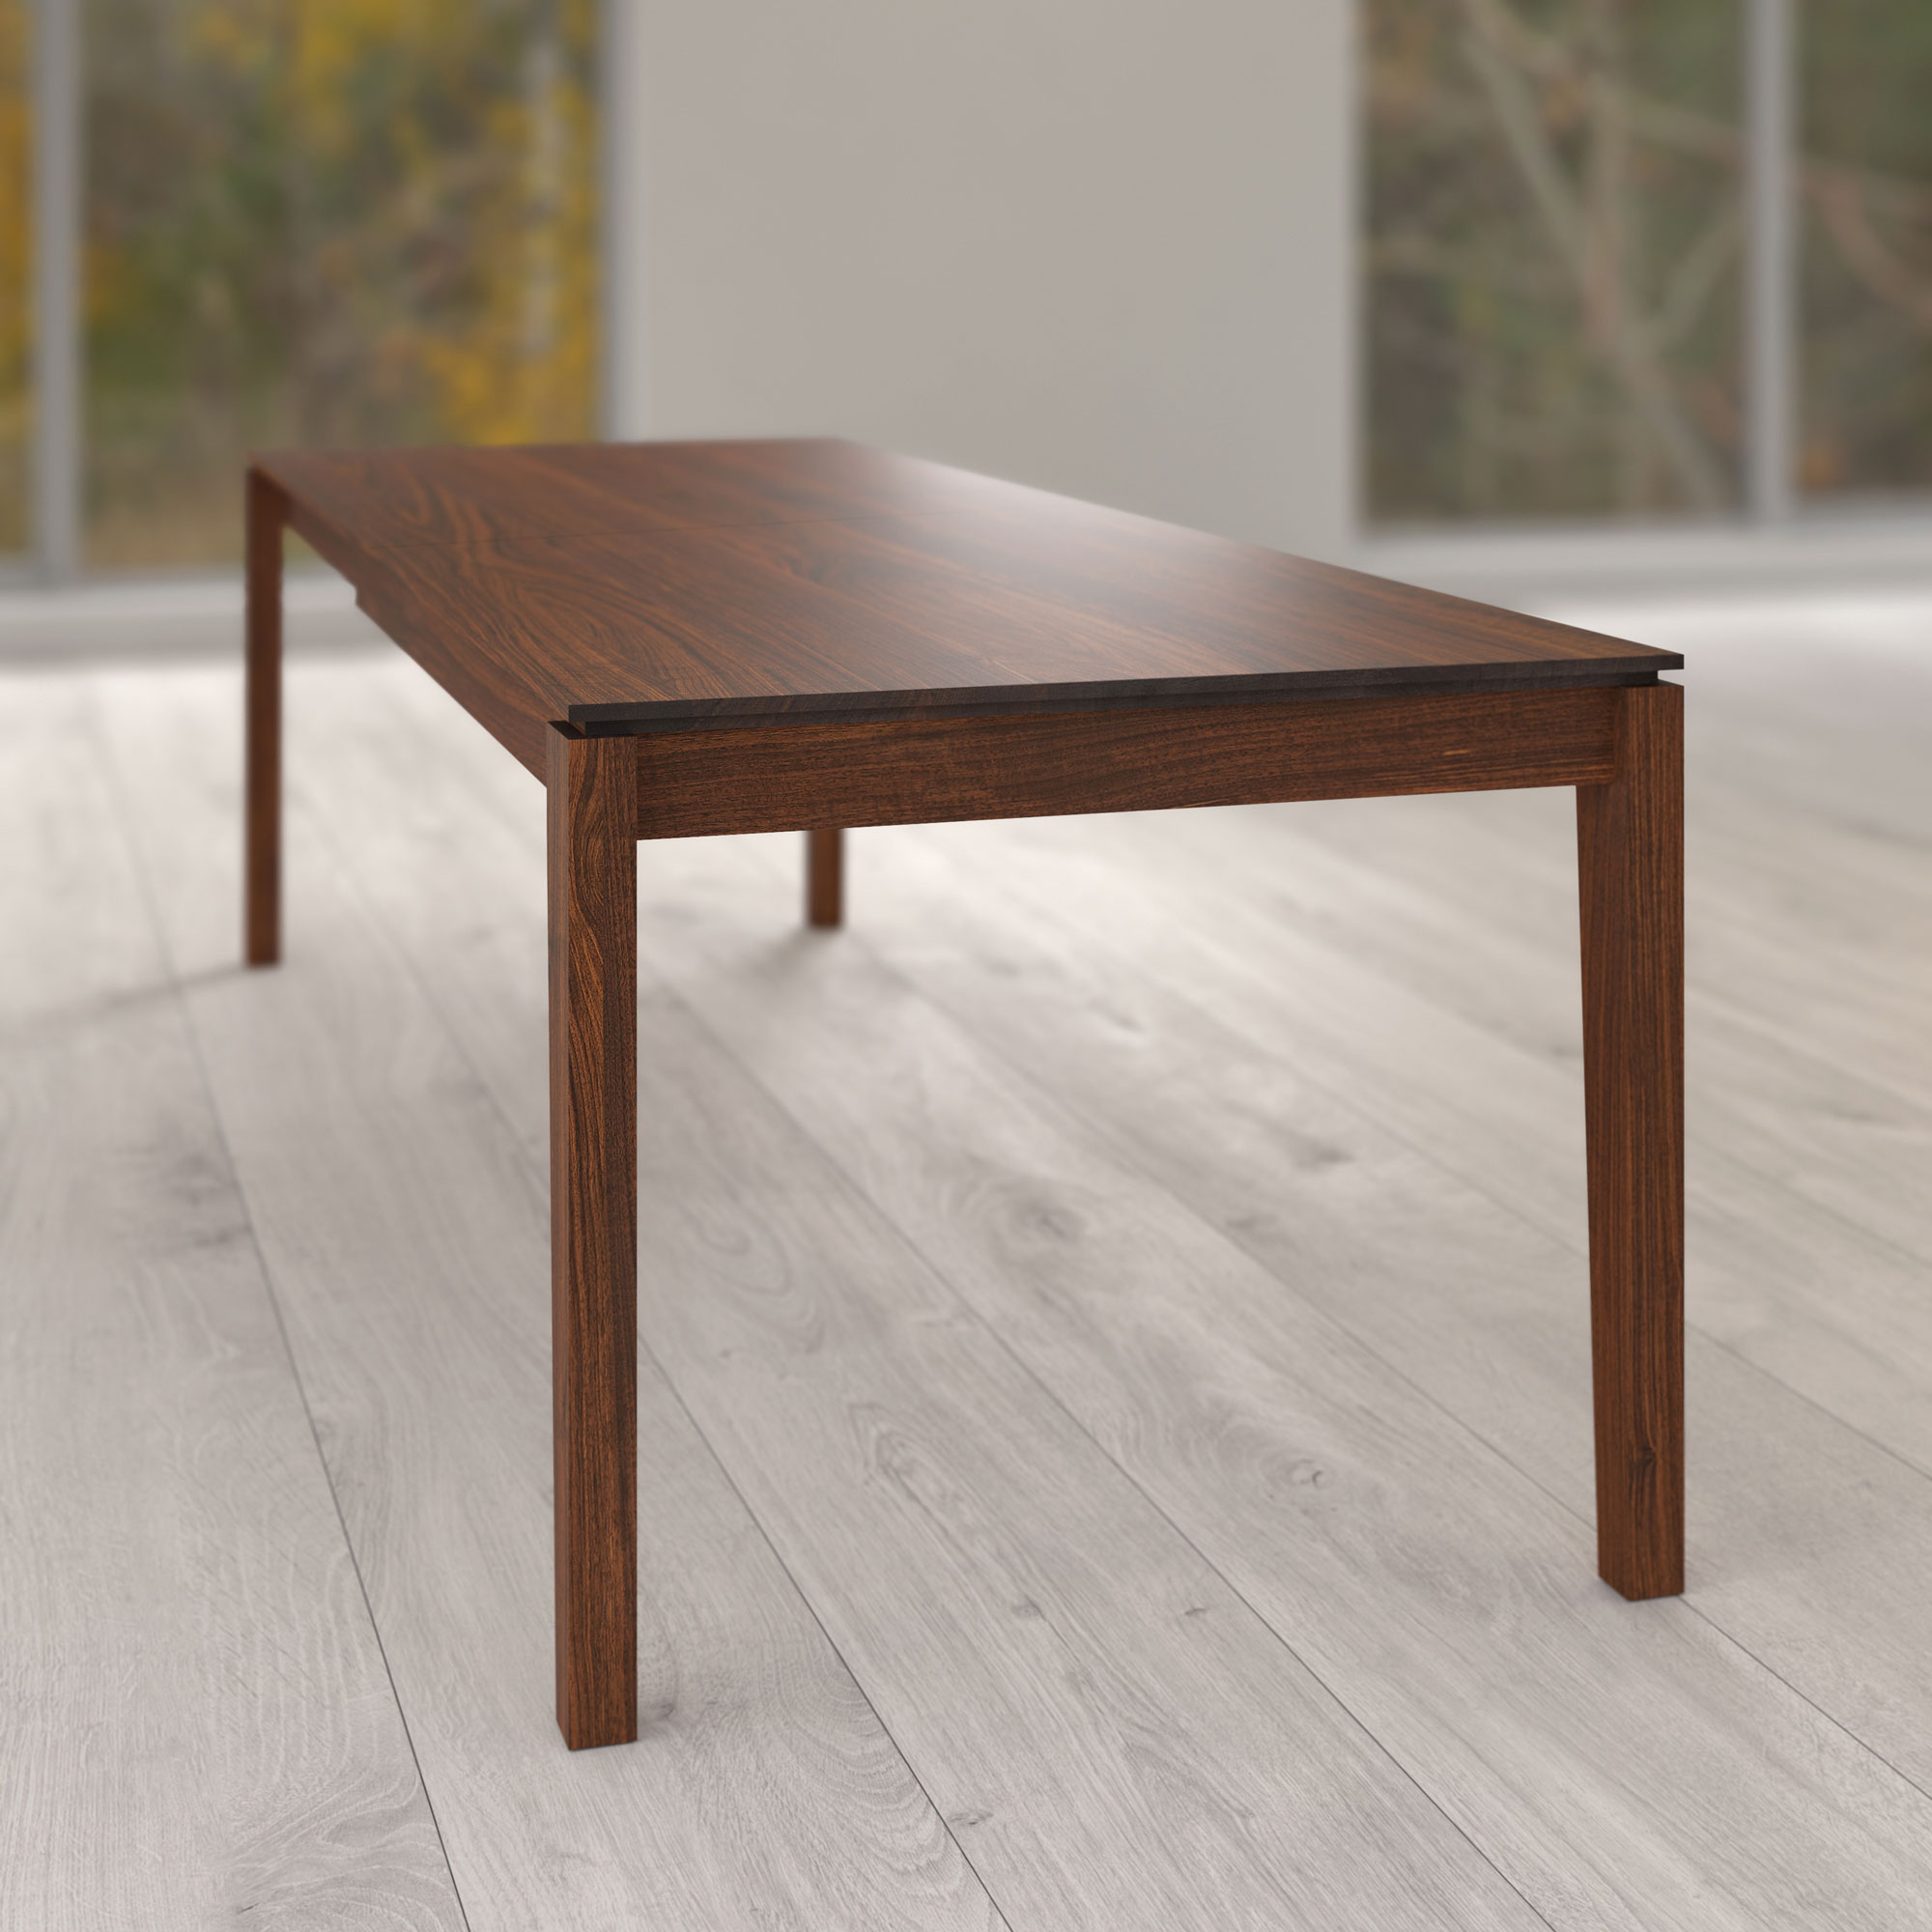 Extending Dining Table CONVERTO BUTTERFLY cam3 custom made in solid wood by vitamin design